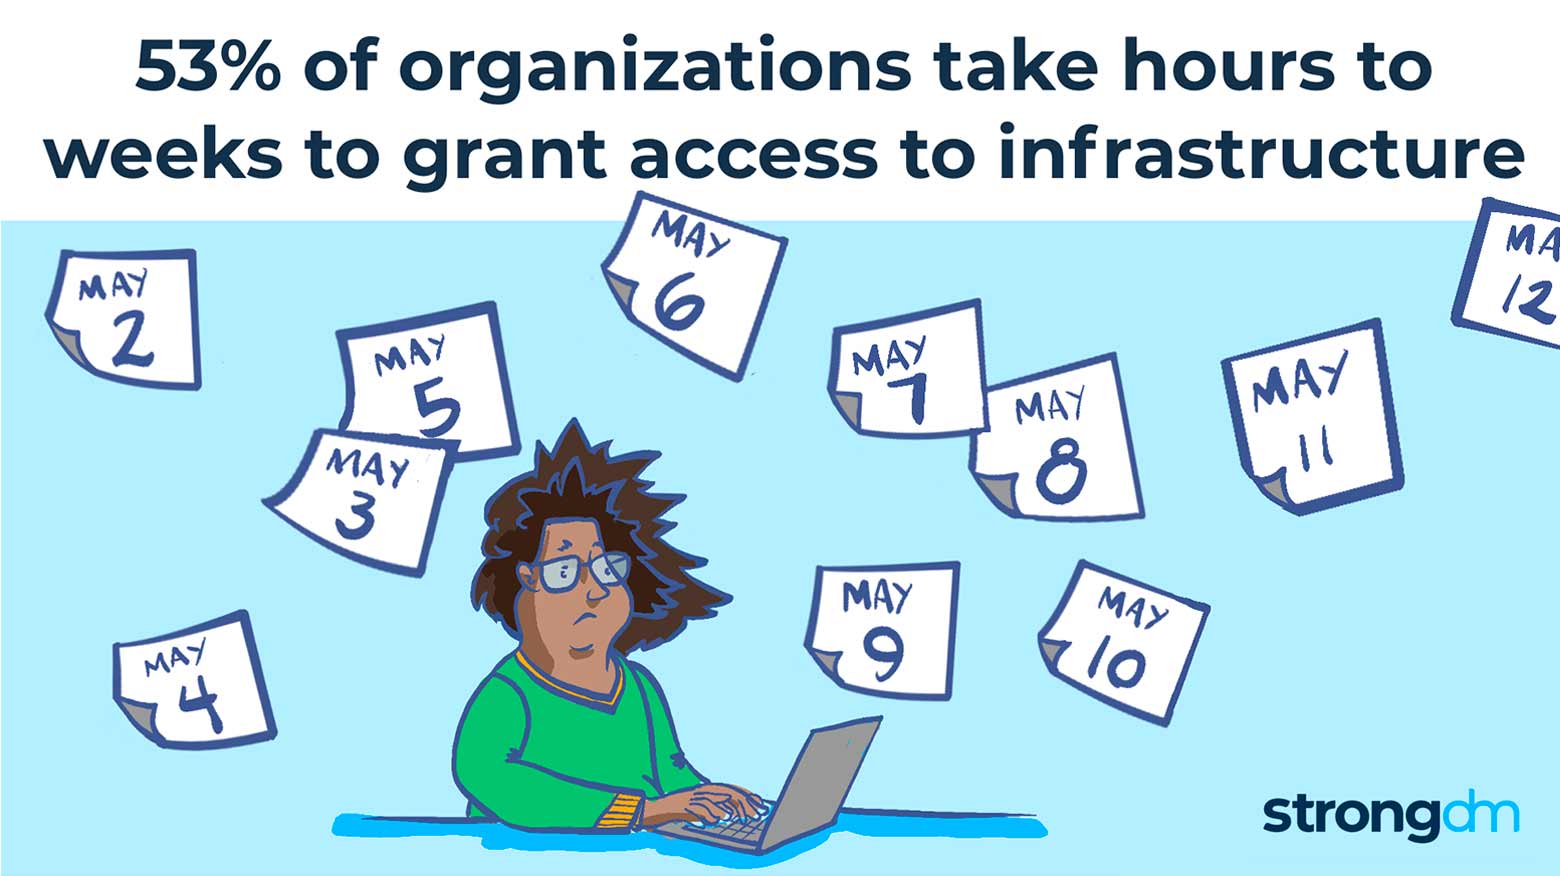 53% of organizations take hours to weeks to grant access to infrastructure